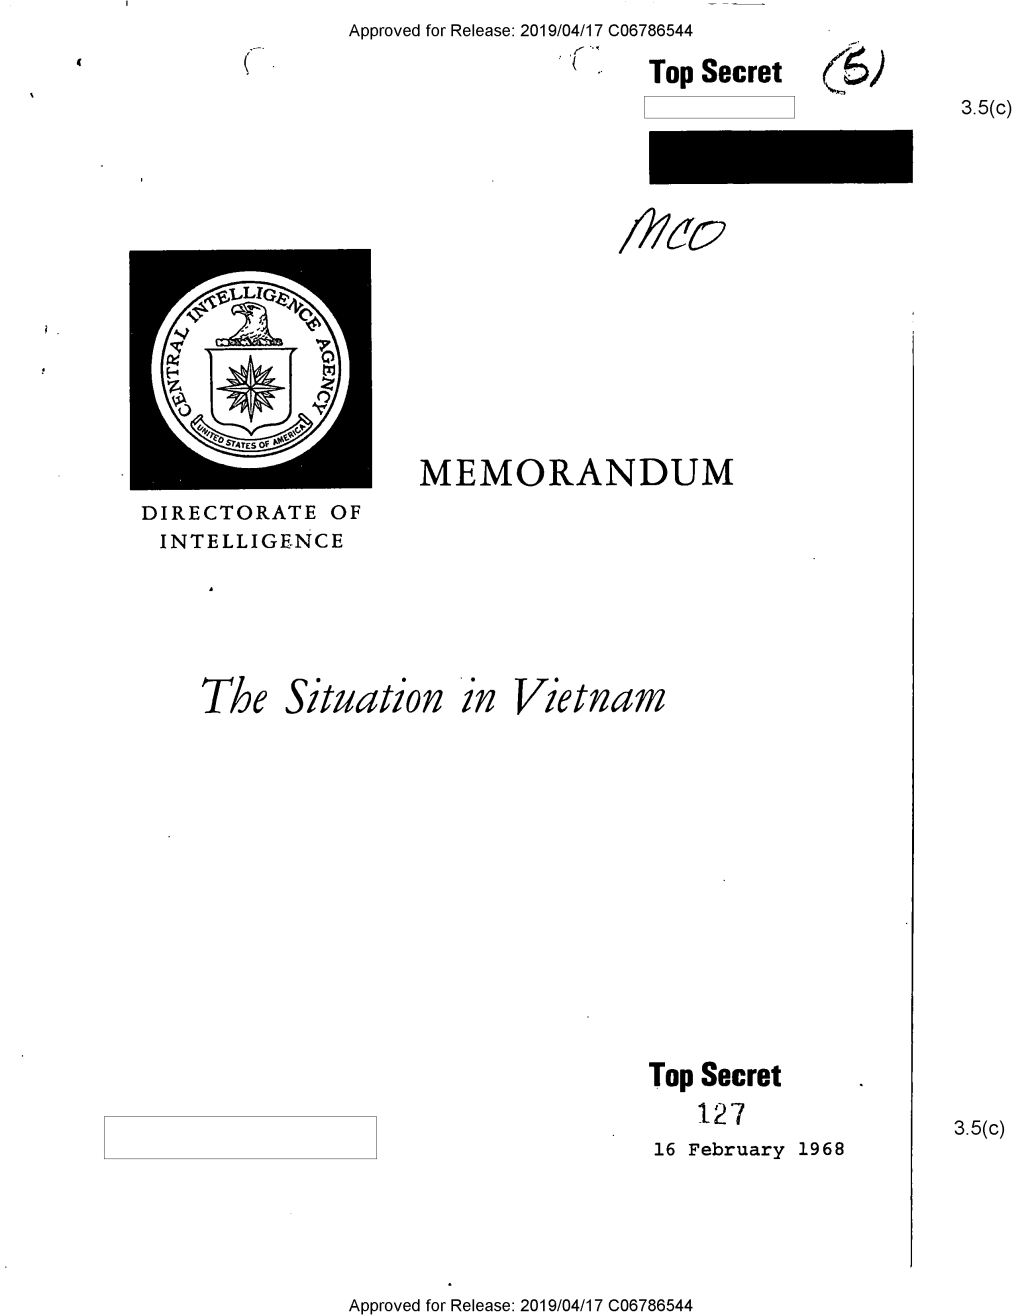 Report on the Situation in Vietnam, 16 February 1968